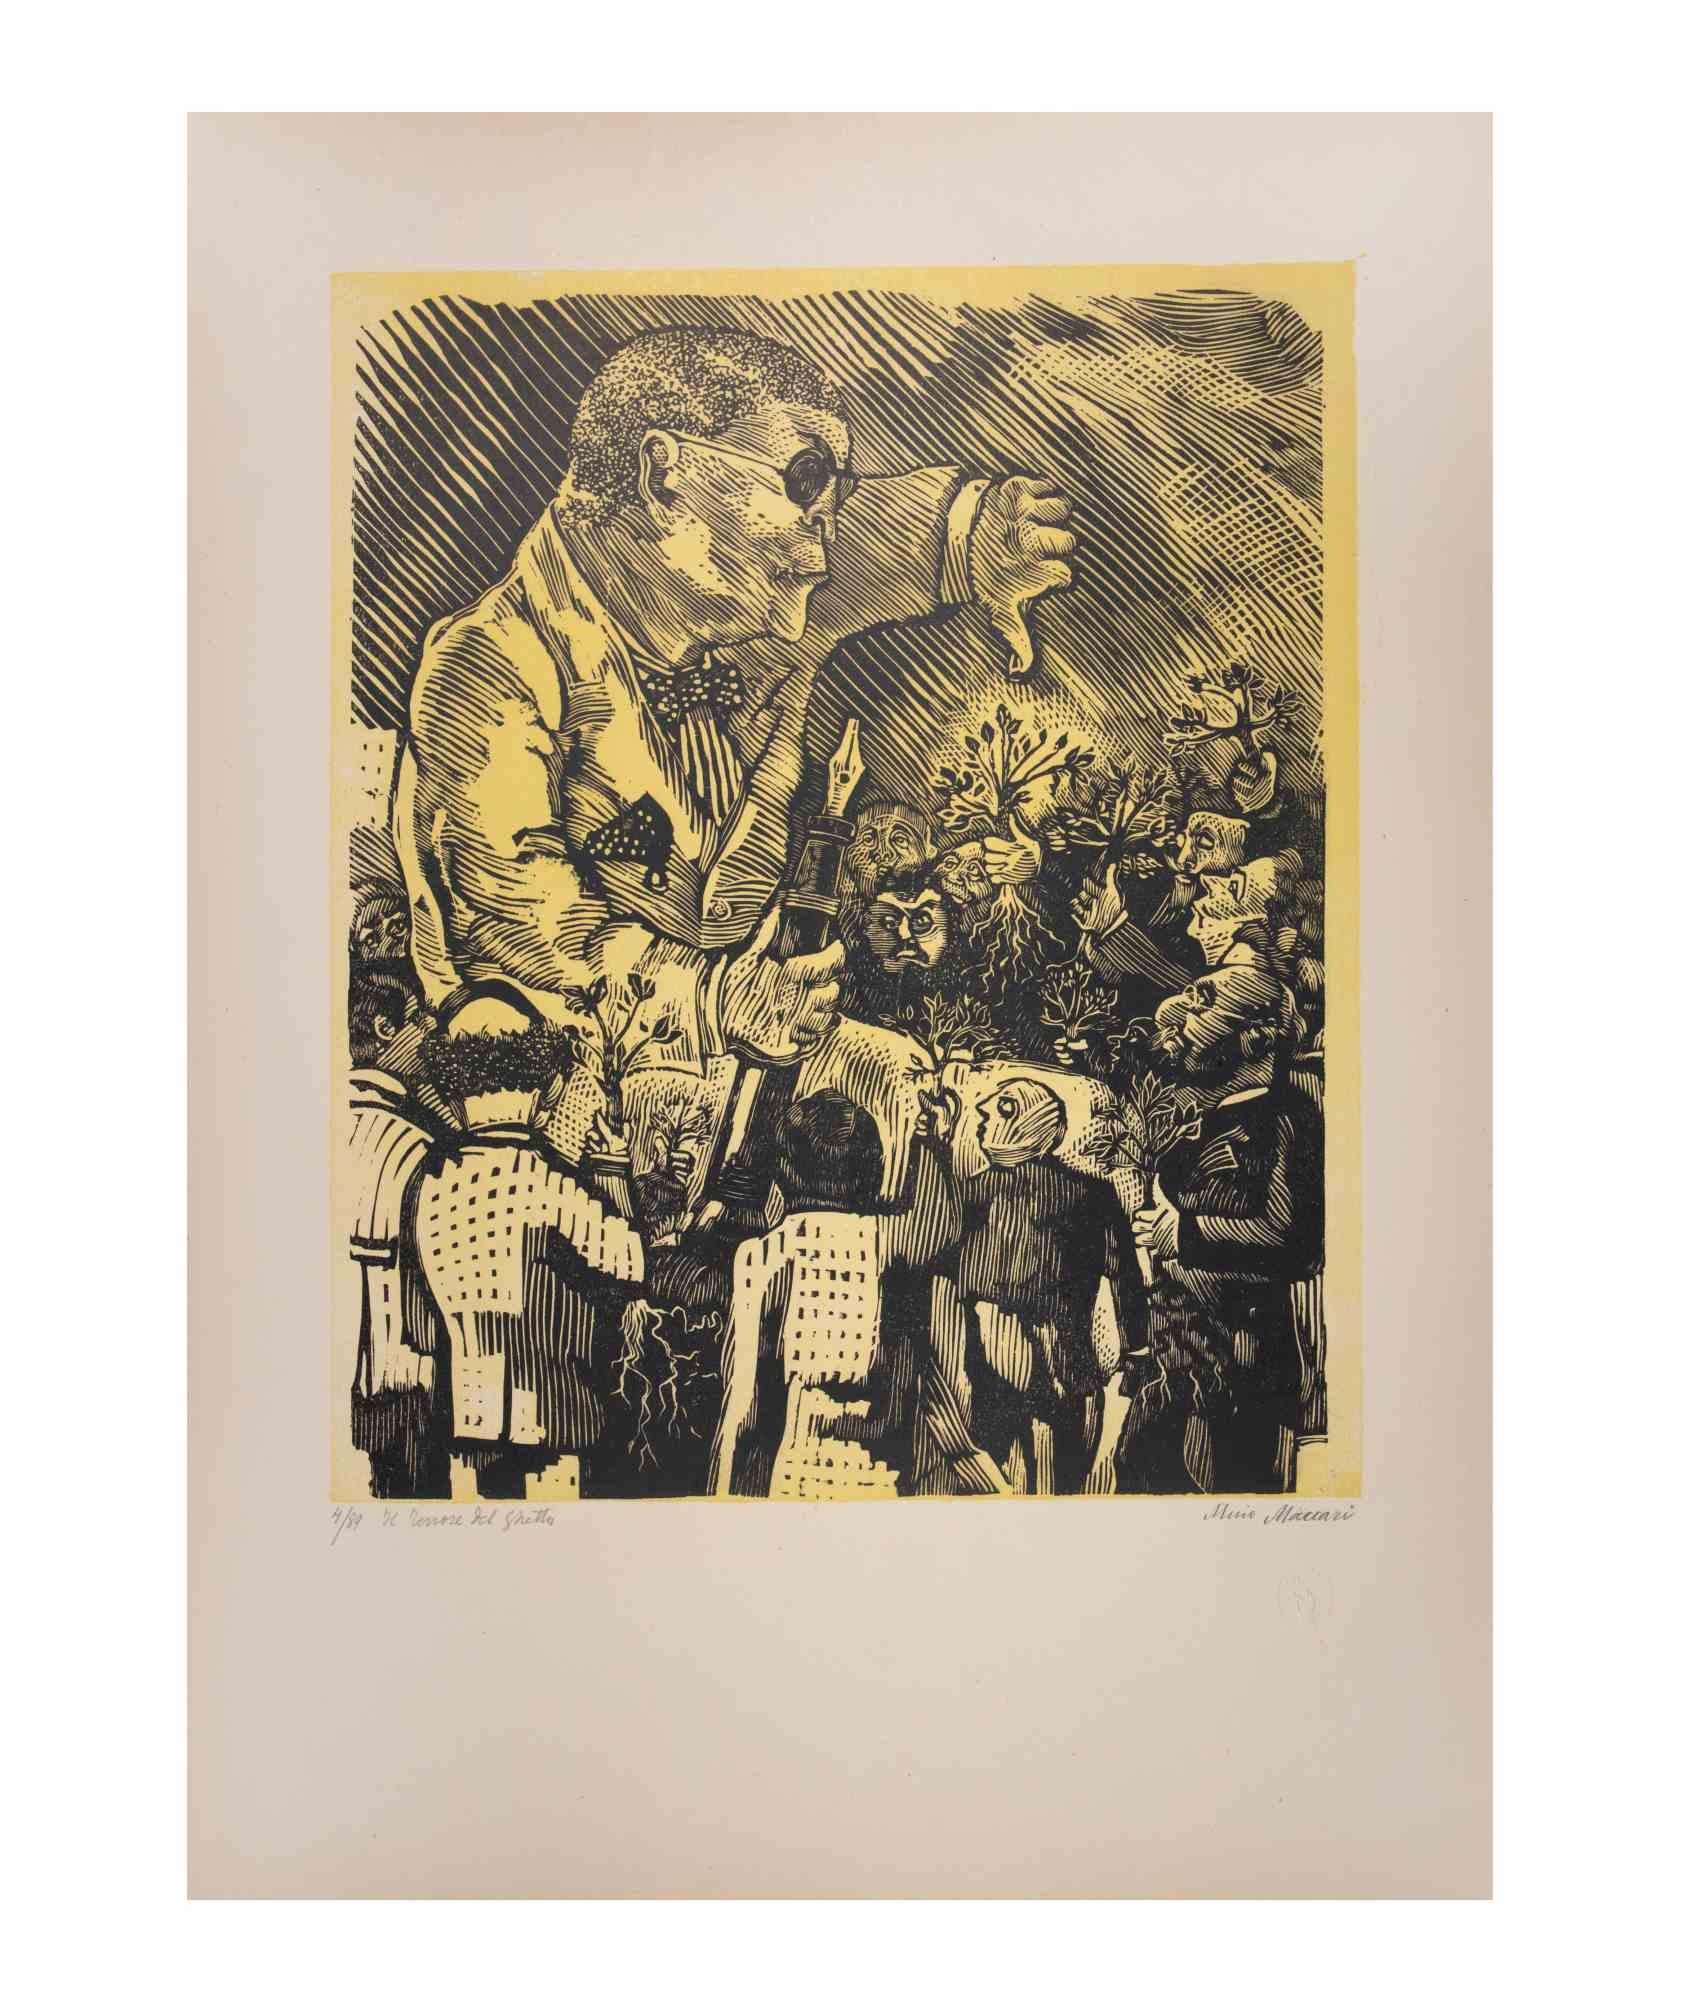 The Terror of the Ghetto is an Artwork realized by Mino Maccari  (1924-1989) in the Mid-20th Century.

Colored woodcut on paper. Hand-signed on the lower, numbered 4/89 specimens and titled on the left margin.

Good conditions.

Mino Maccari (Siena,